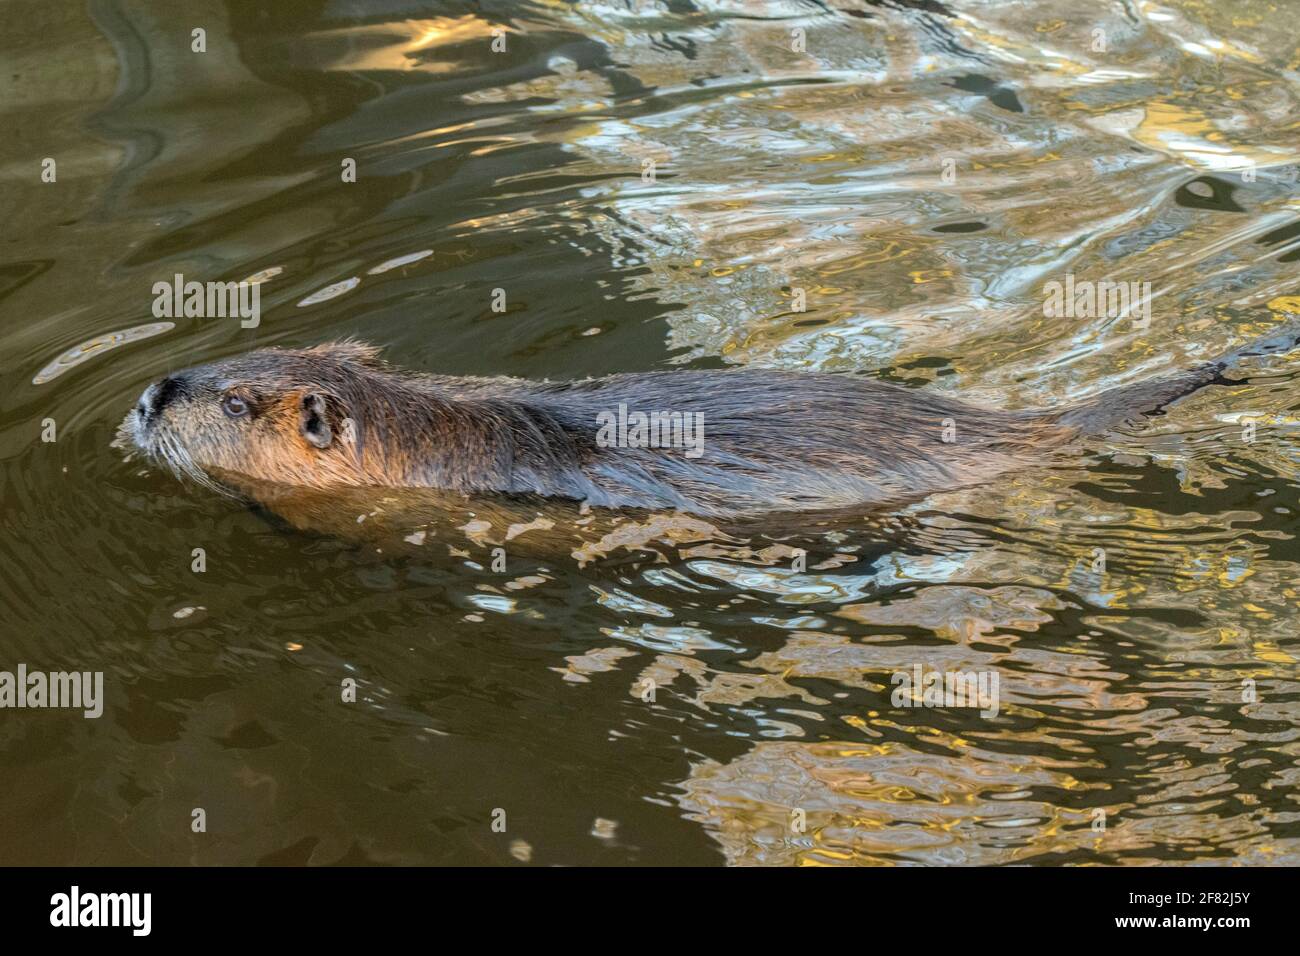 Beaver Swimming In The Water At Artis Zoo Amsterdam The Netherlands 30-12-2019 Stock Photo